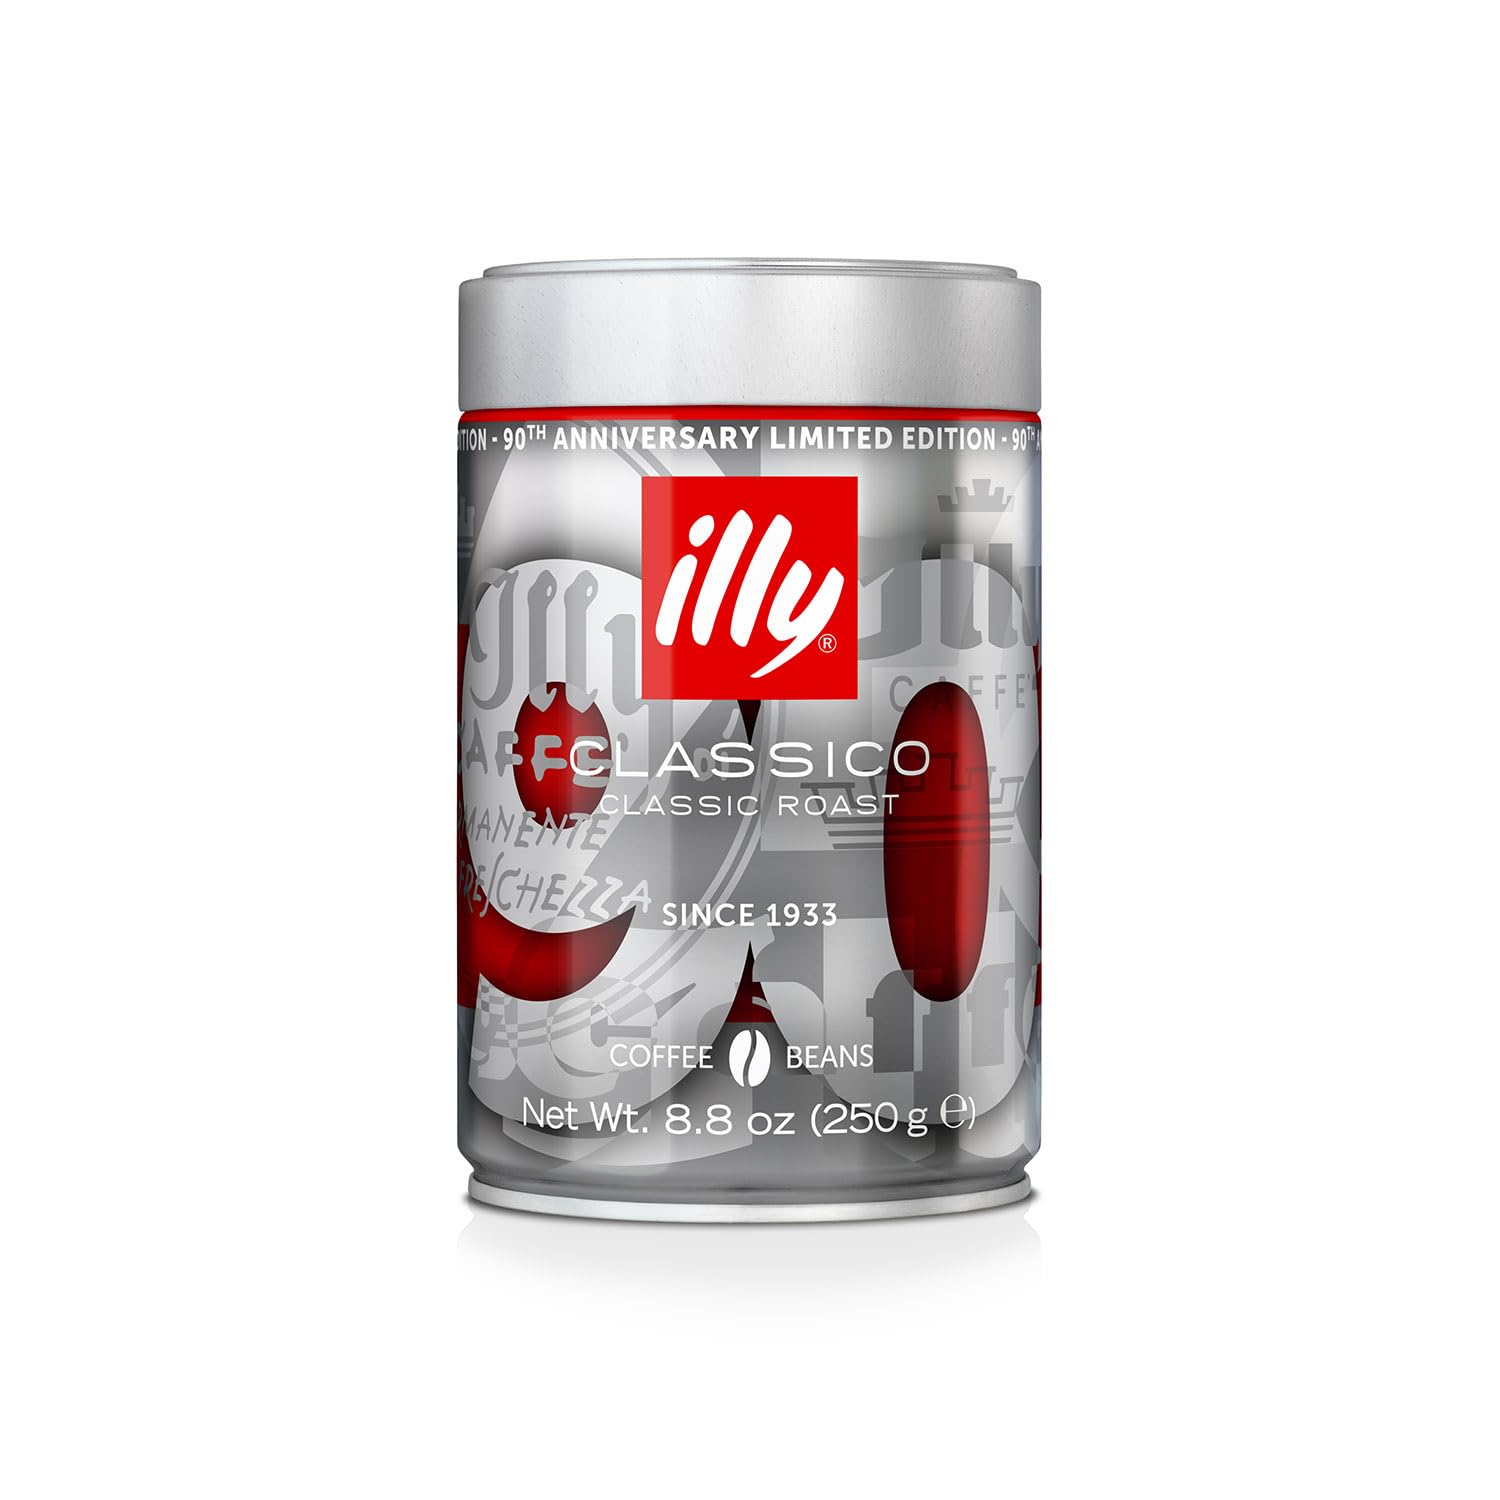 Illy Classico Whole Bean Coffee Medium Roast 90th Anniversay Edition, 8.8 Ounce Can (Pack of 1) : Grocery & Gourmet Food